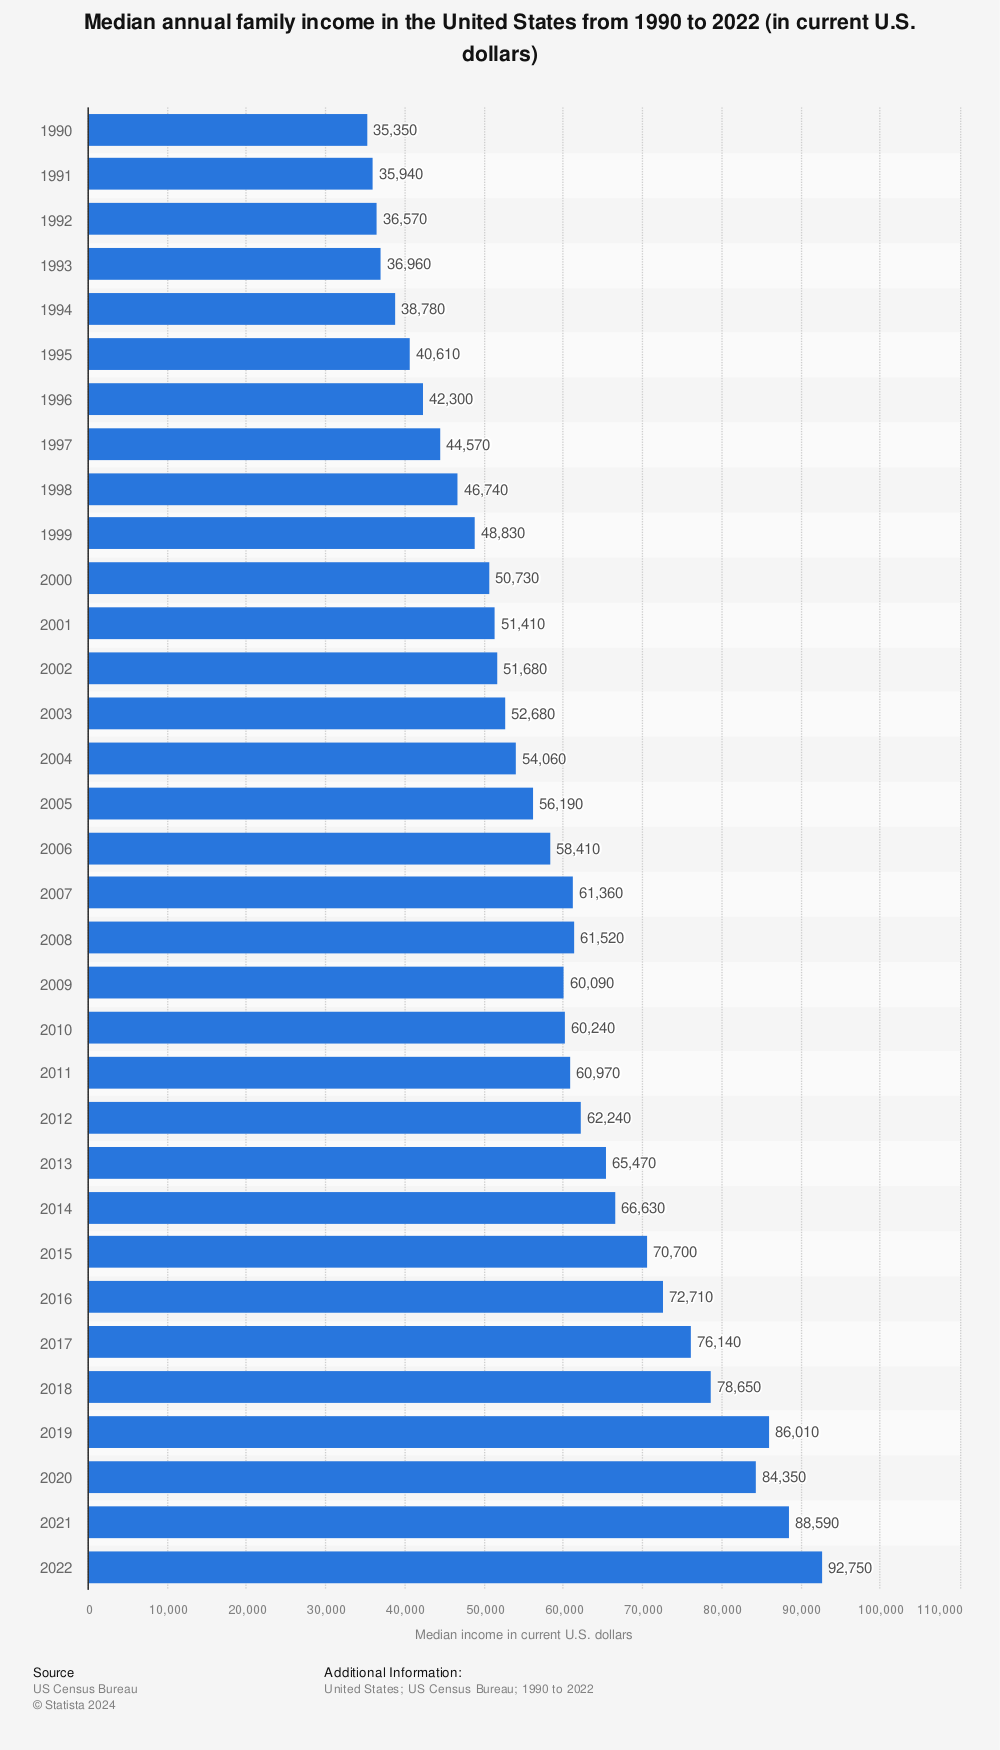 Statistic: Median annual family income in the United States from 1990 to 2020 (in U.S. dollars) | Statista